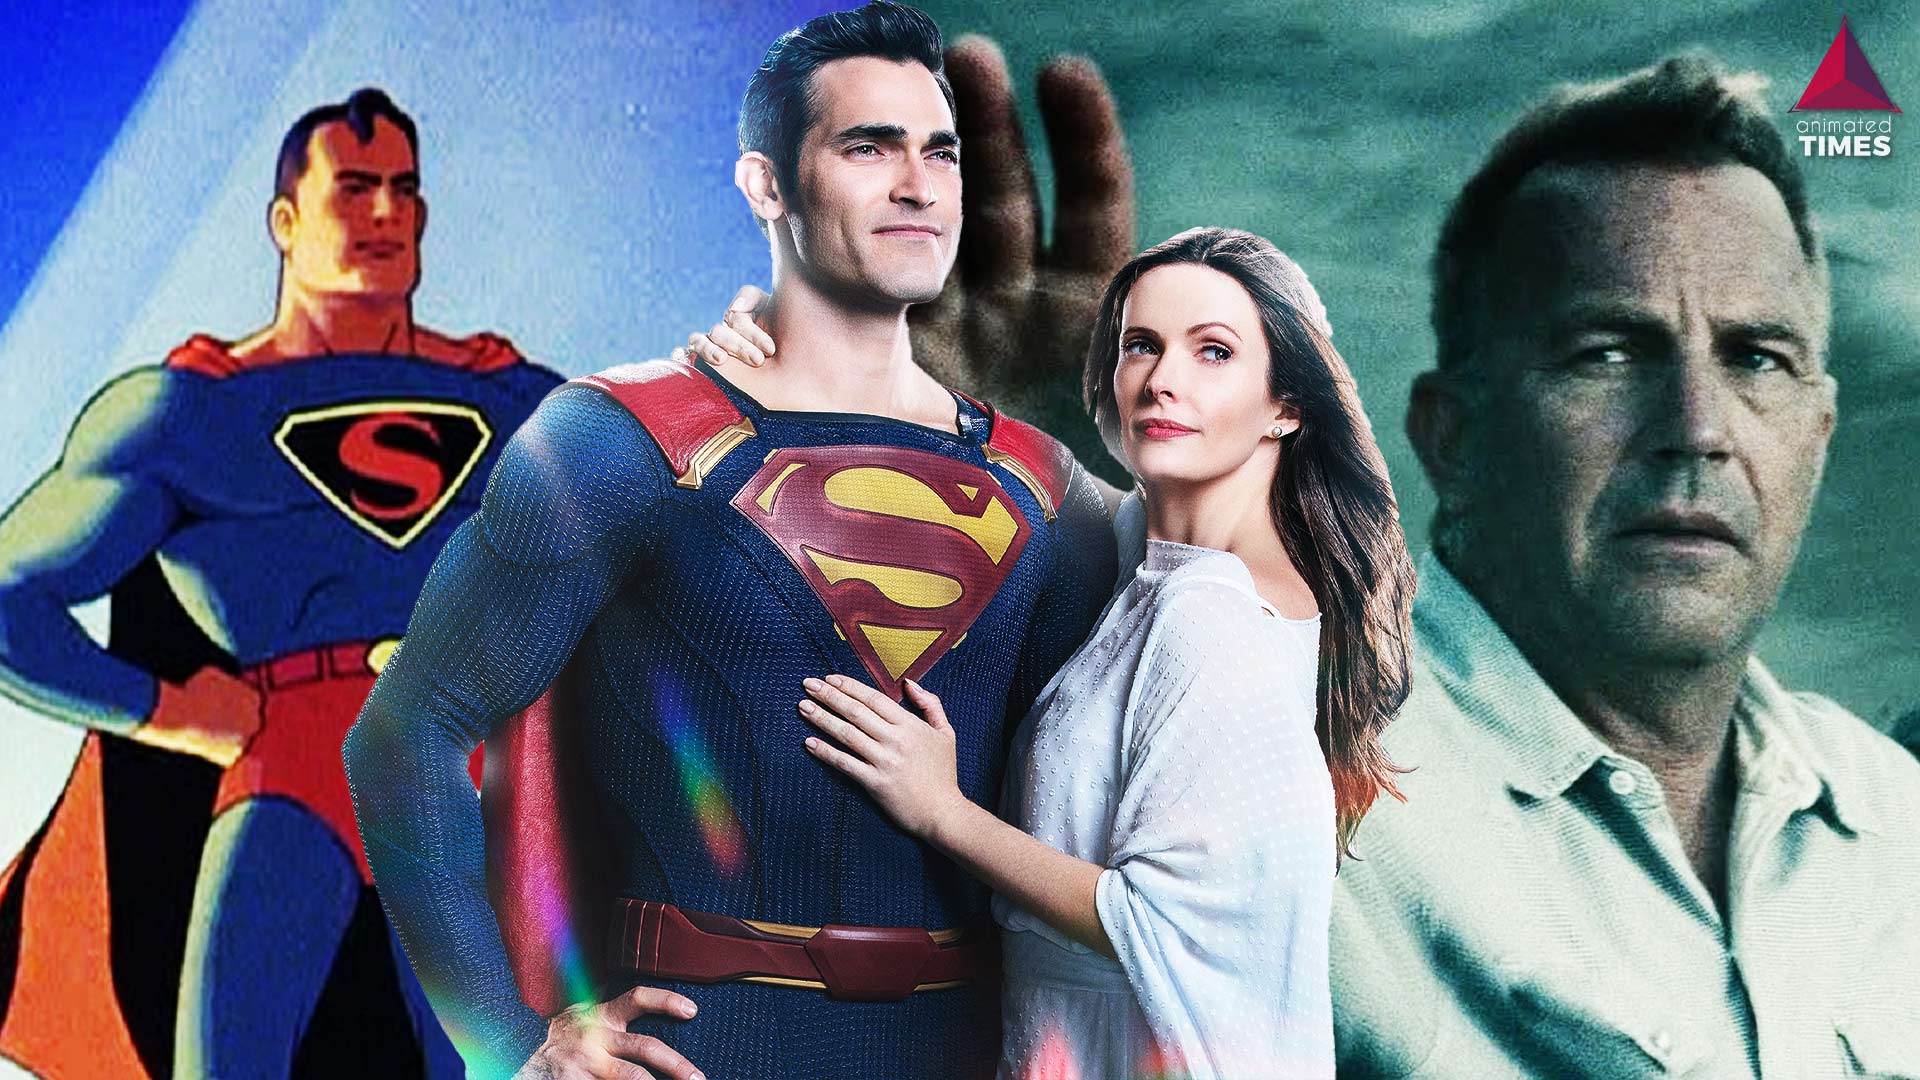 All The Easter Eggs From The Premiere Of Superman & Lois!